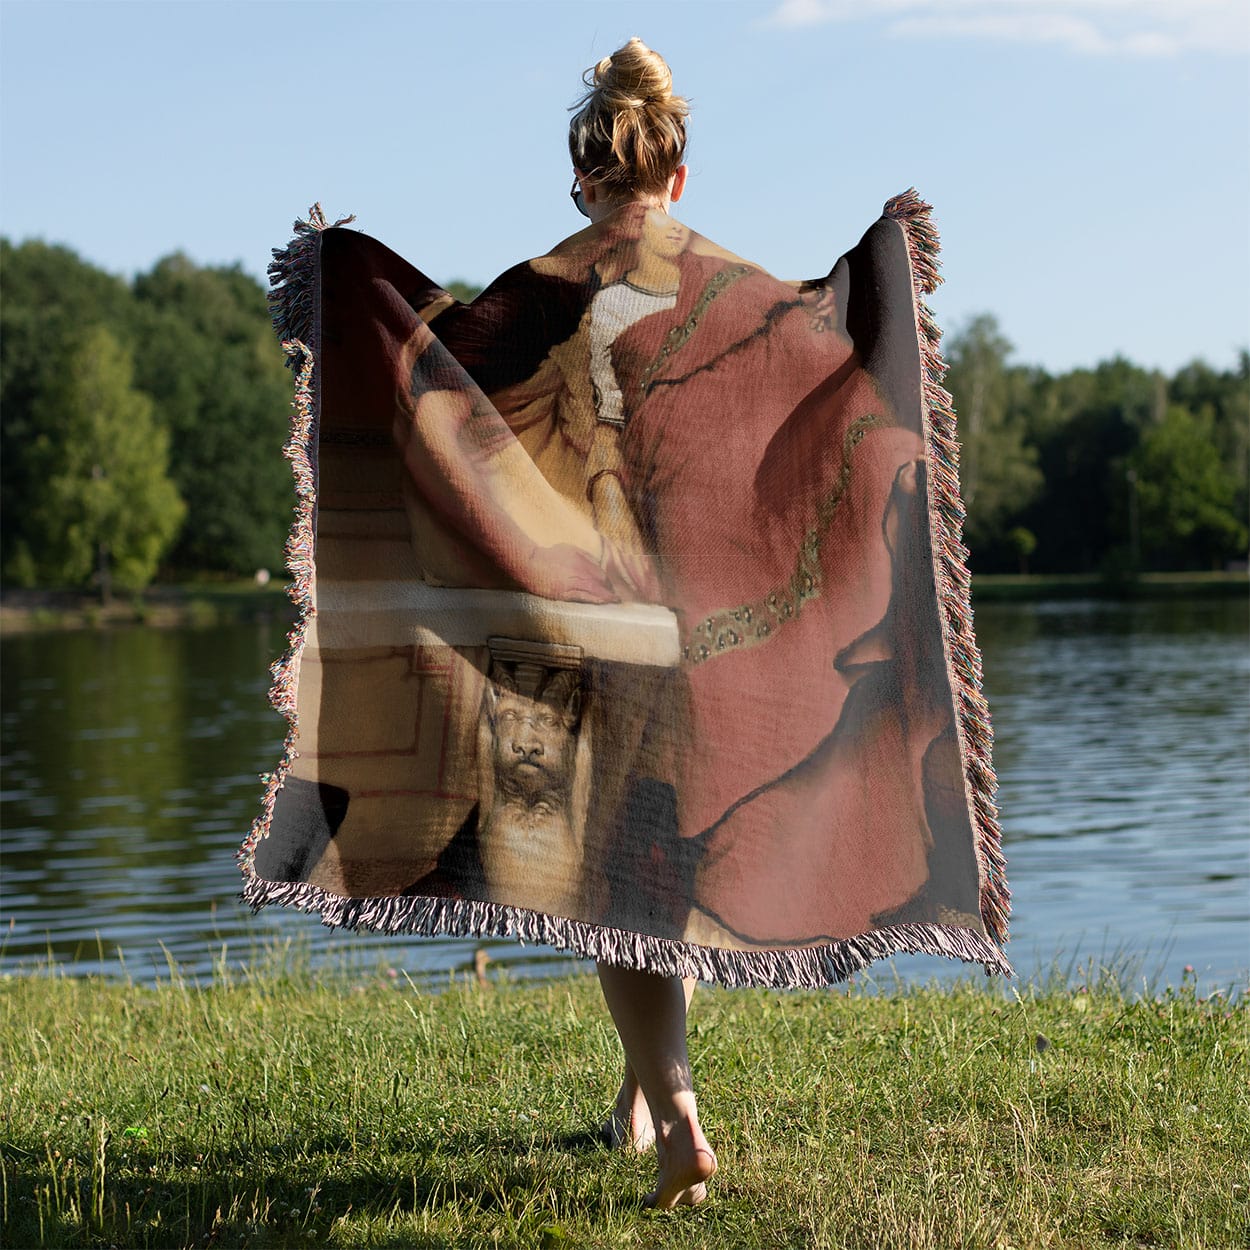 Renaissance Youth Woven Blanket Held on a Woman's Back Outside